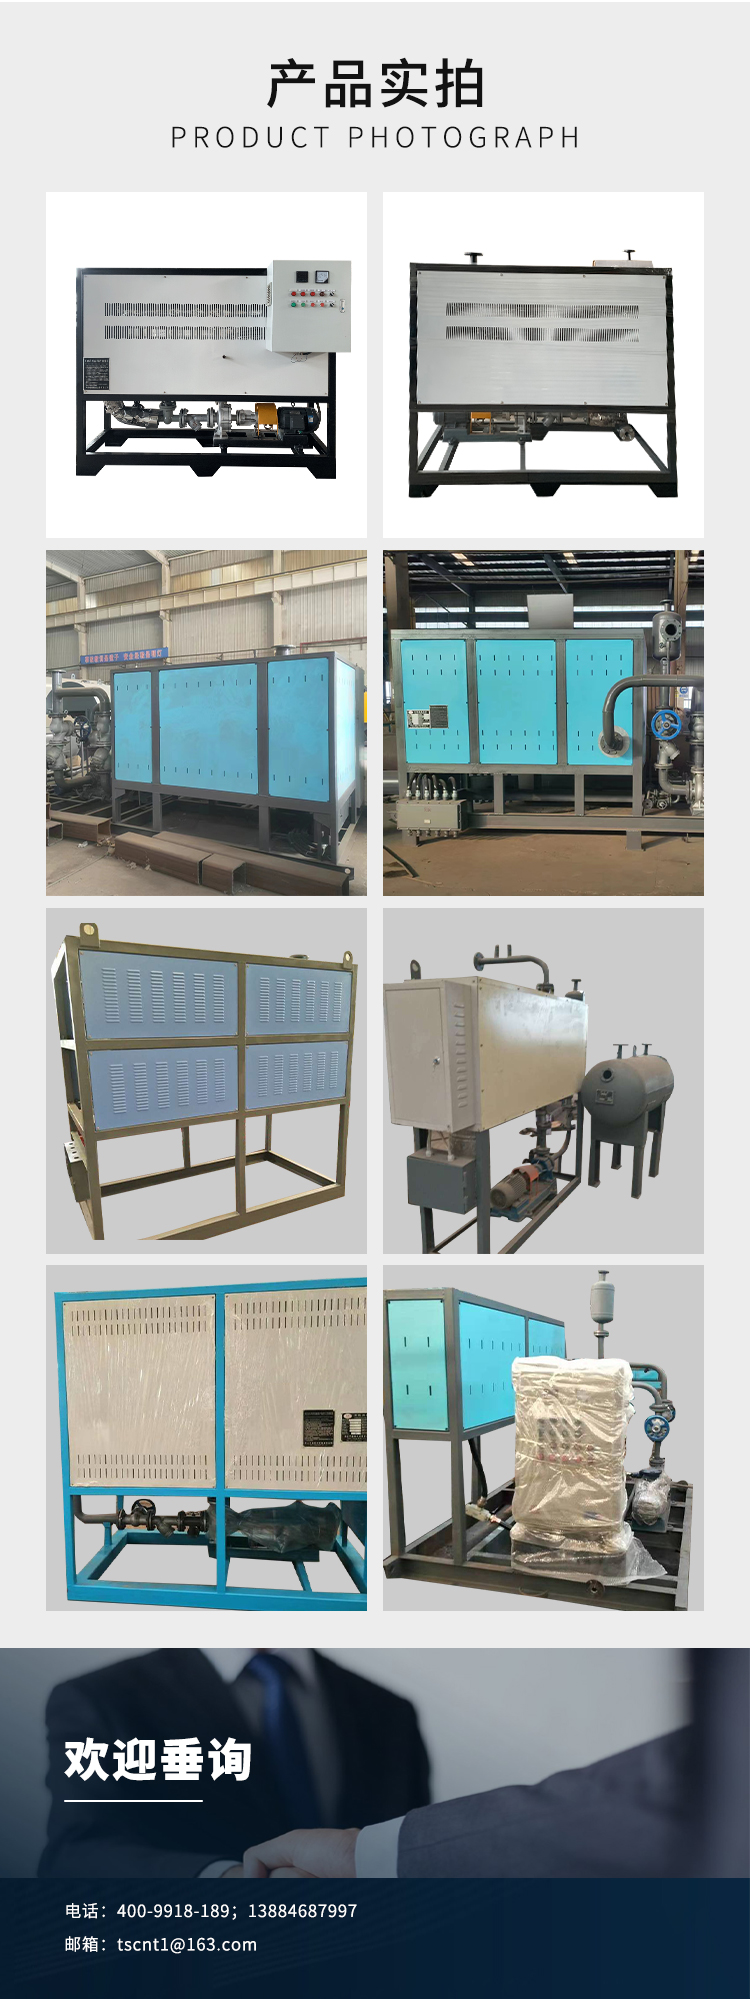 300-3000kw electric thermal oil furnace, electric heater, industrial heater